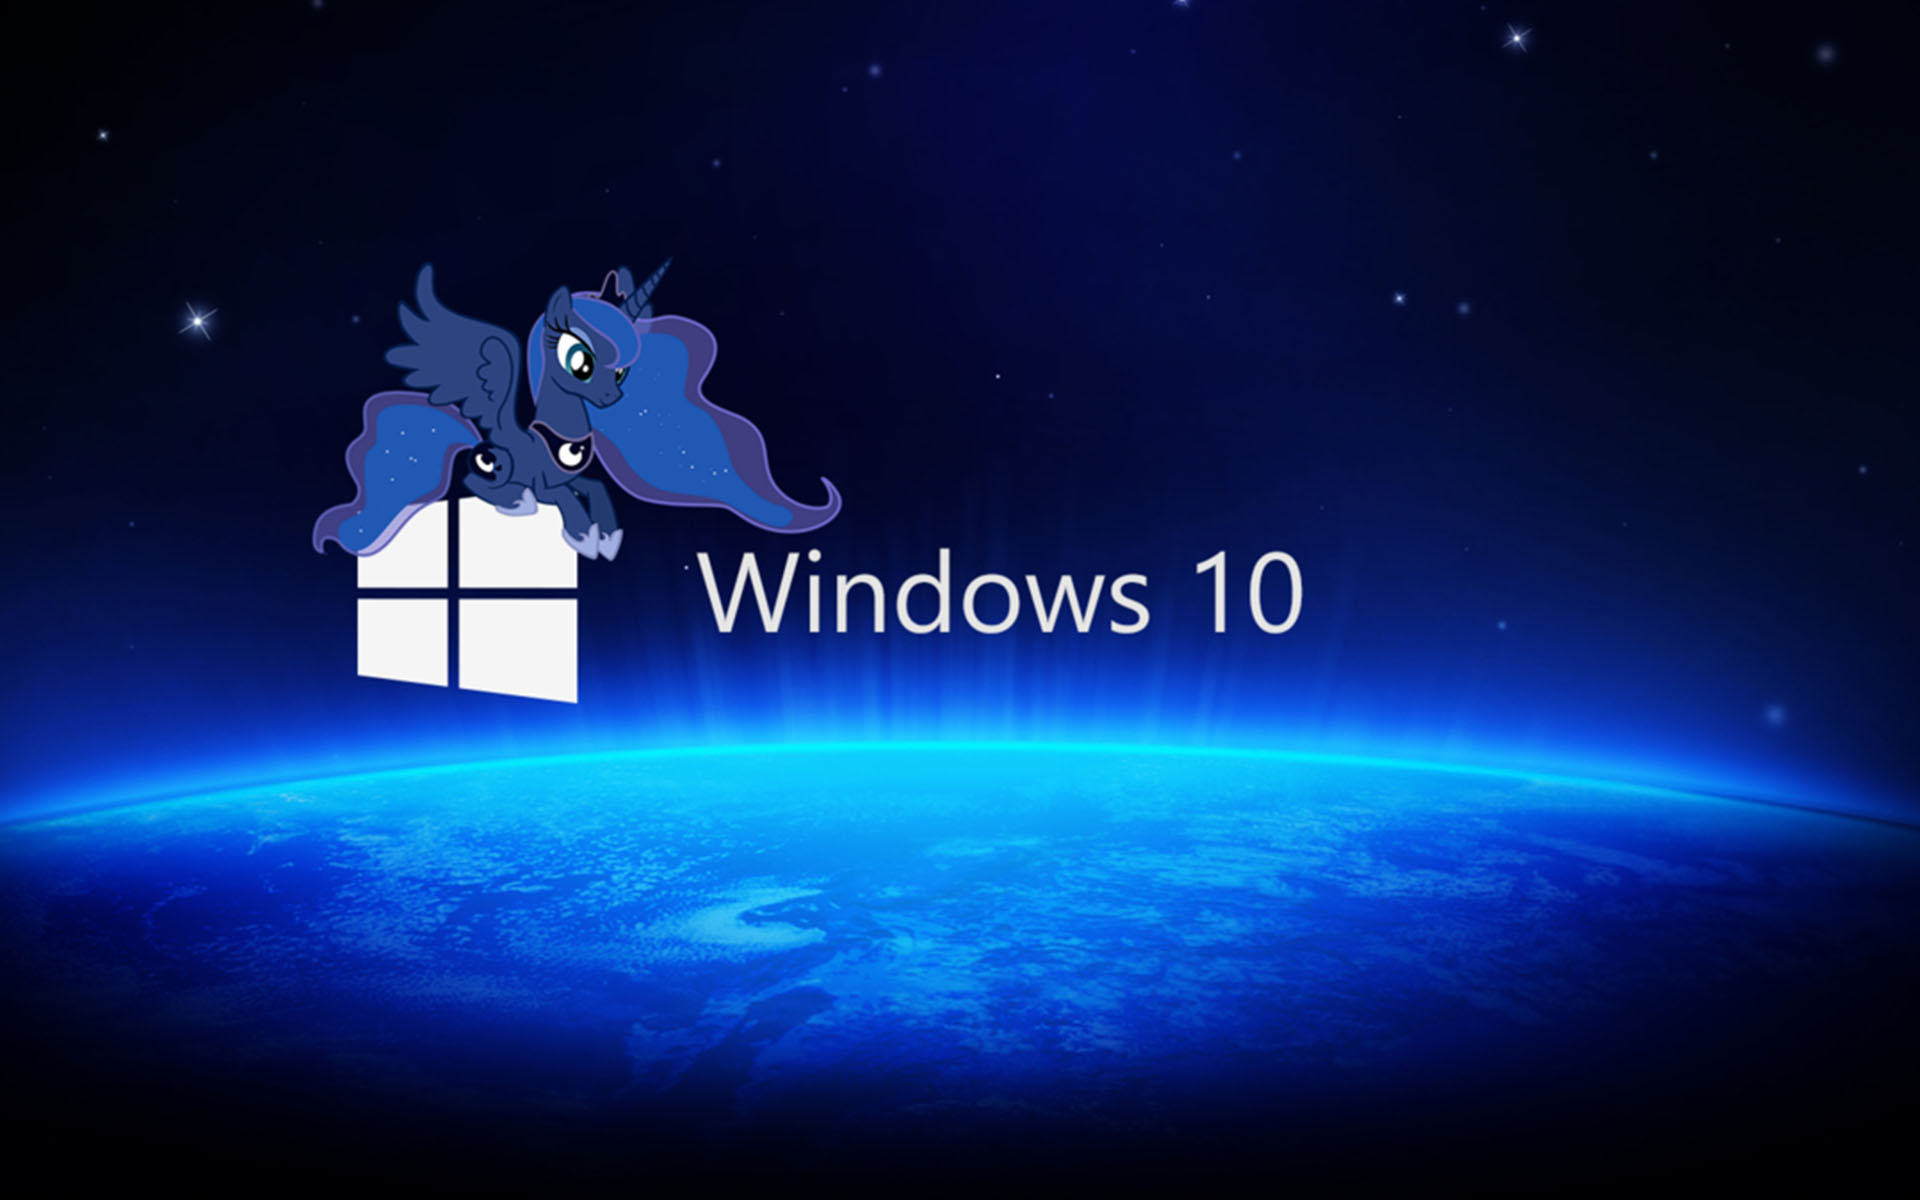 Windows 10 Official Wallpape   Wallpapers